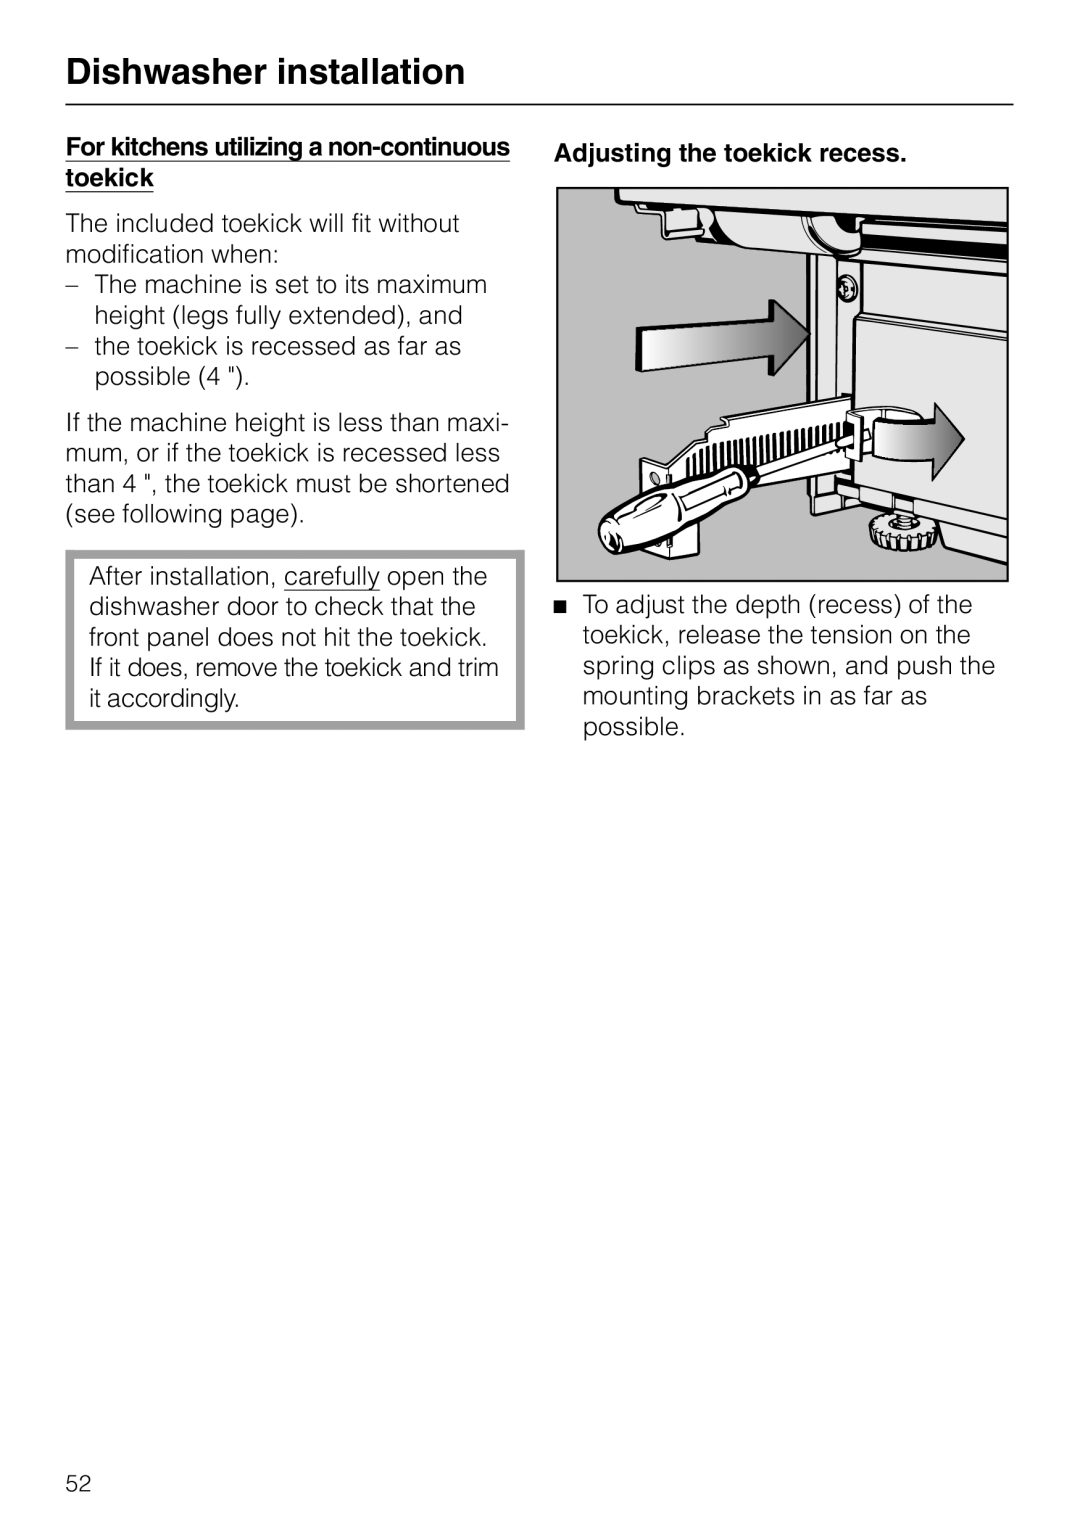 Miele M.-NR. 04 390 922 operating instructions Dishwasher installation, For kitchens utilizing a non-continuoustoekick 